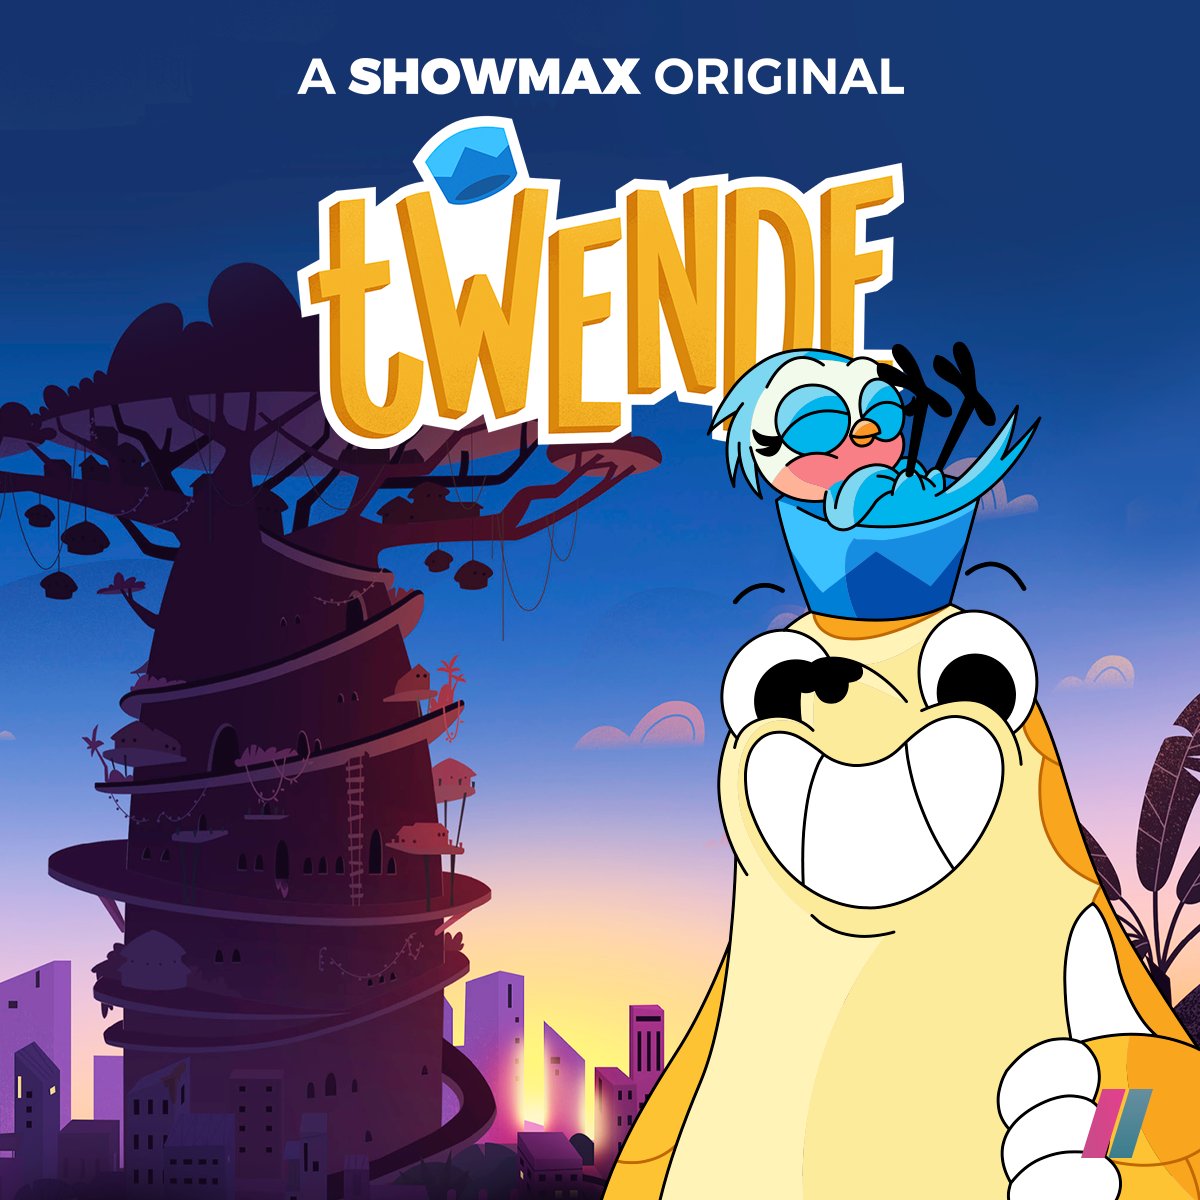 Twende's more than just a comedy, it's a story of friendship, adventure, and standing up for what's right. Join the journey.
shw.mx/40ANf2V
#TwendeShowmax